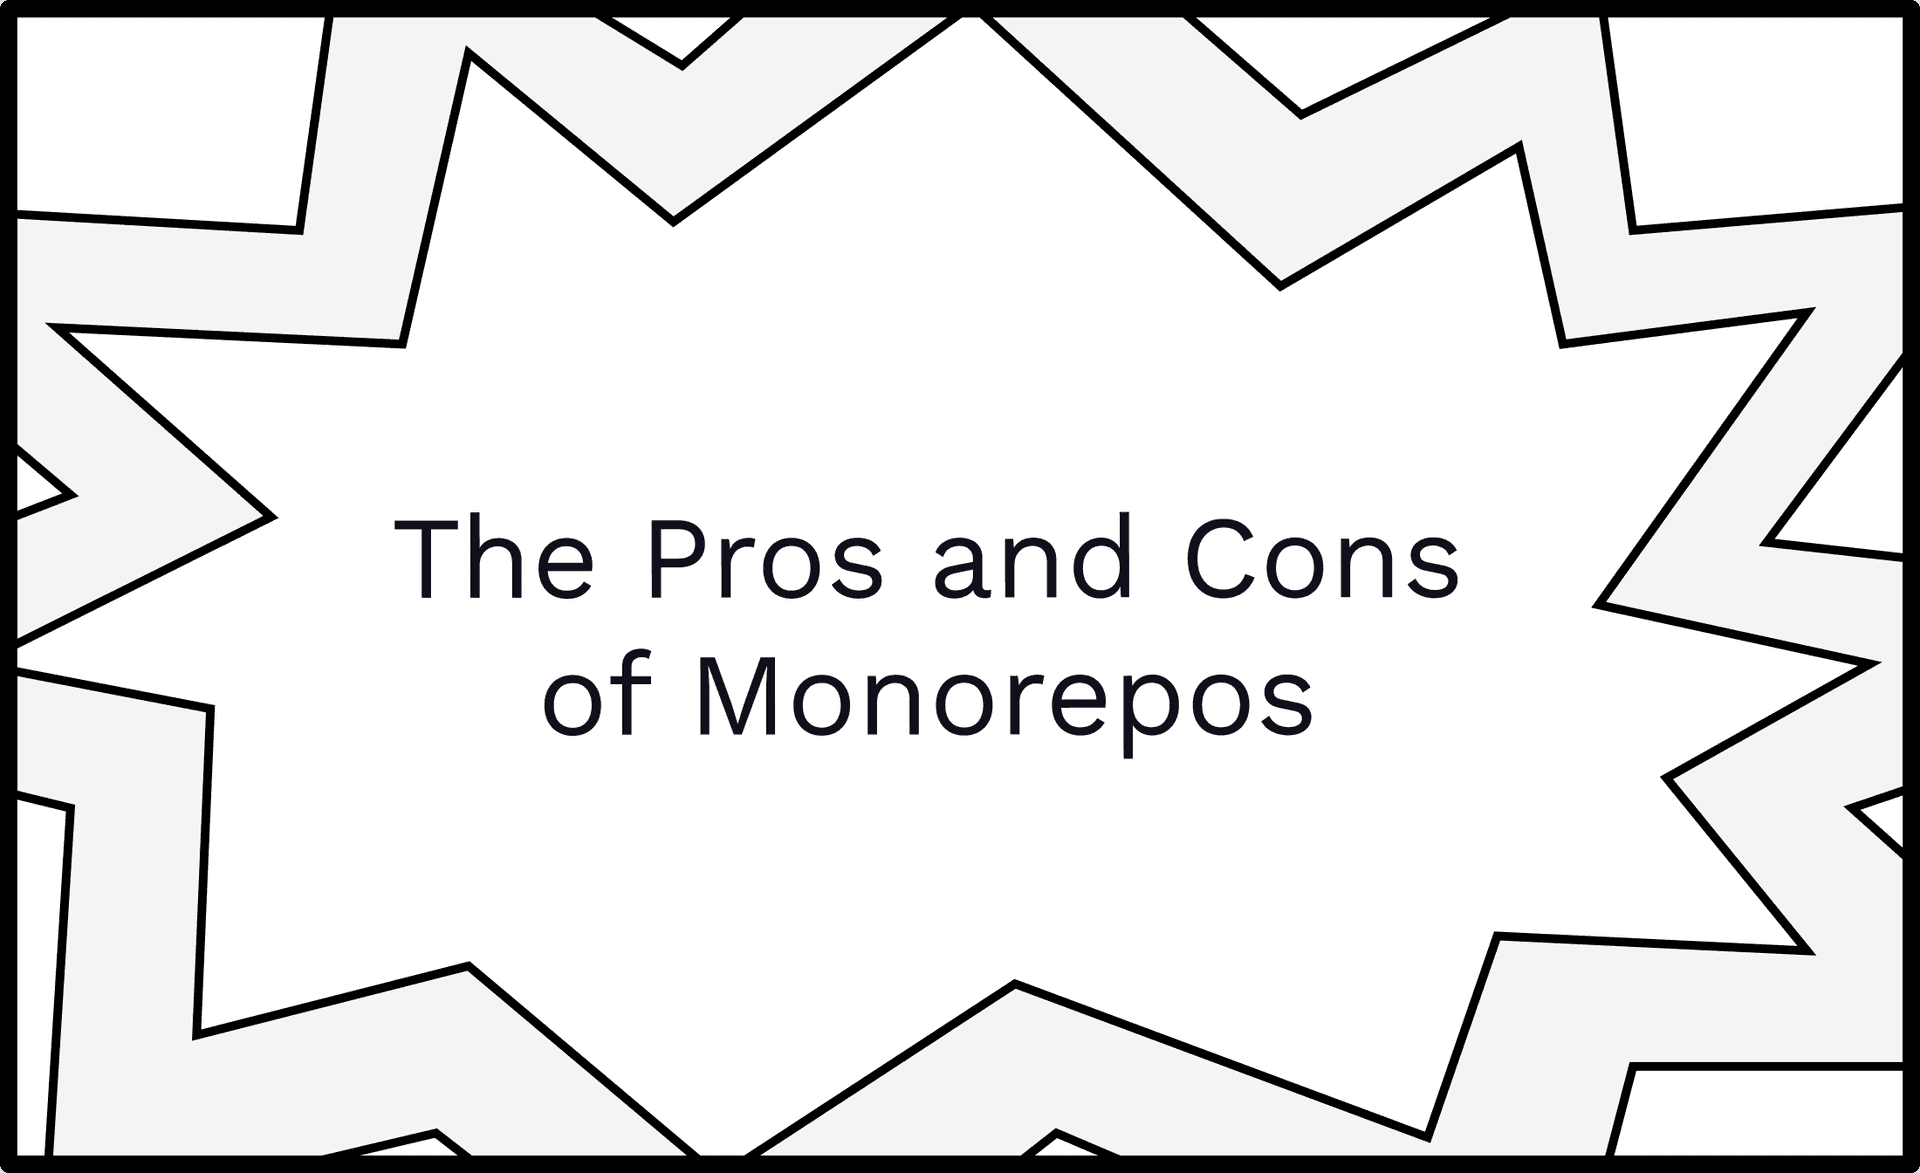 The Pros and Cons of Monorepos